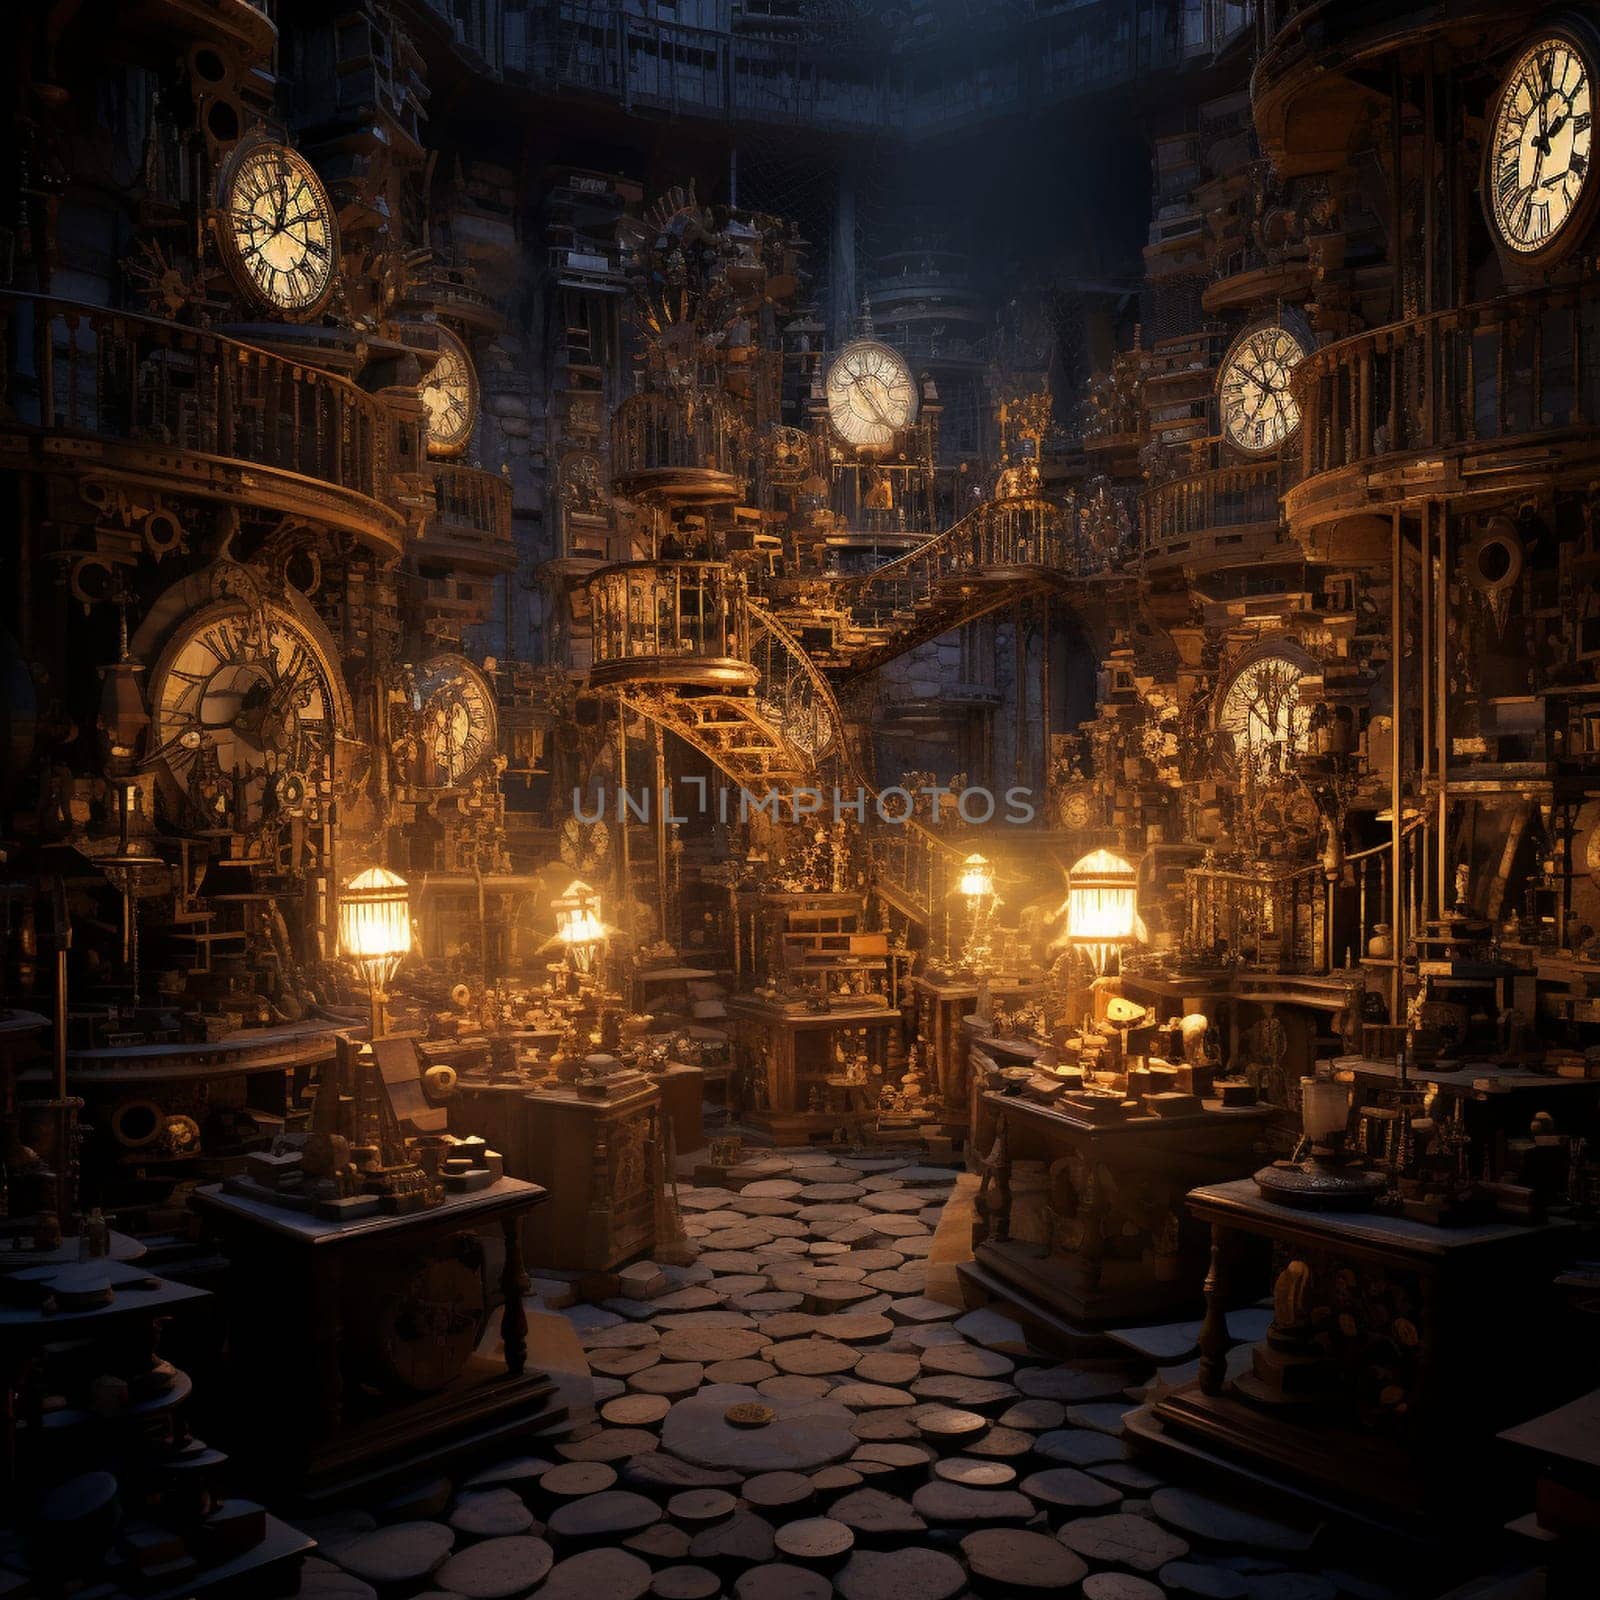 Step into a world of wonder with this surreal grand library filled with shelves upon shelves of vintage clocks. Each clock is frozen at a different time, their hands replaced with intricate gears and cogs, creating an otherworldly appearance. Soft candlelight bathes the scene, casting eerie shadows on the dusty tomes that surround the clocks. Outside the tall windows, a full moon adds to the mystical ambiance, hinting at the timeless stories waiting to be discovered within this mystical time capsule. The art style of this illustration blends elements of realism and fantasy, resembling a meticulously hand-drawn vintage engraving.